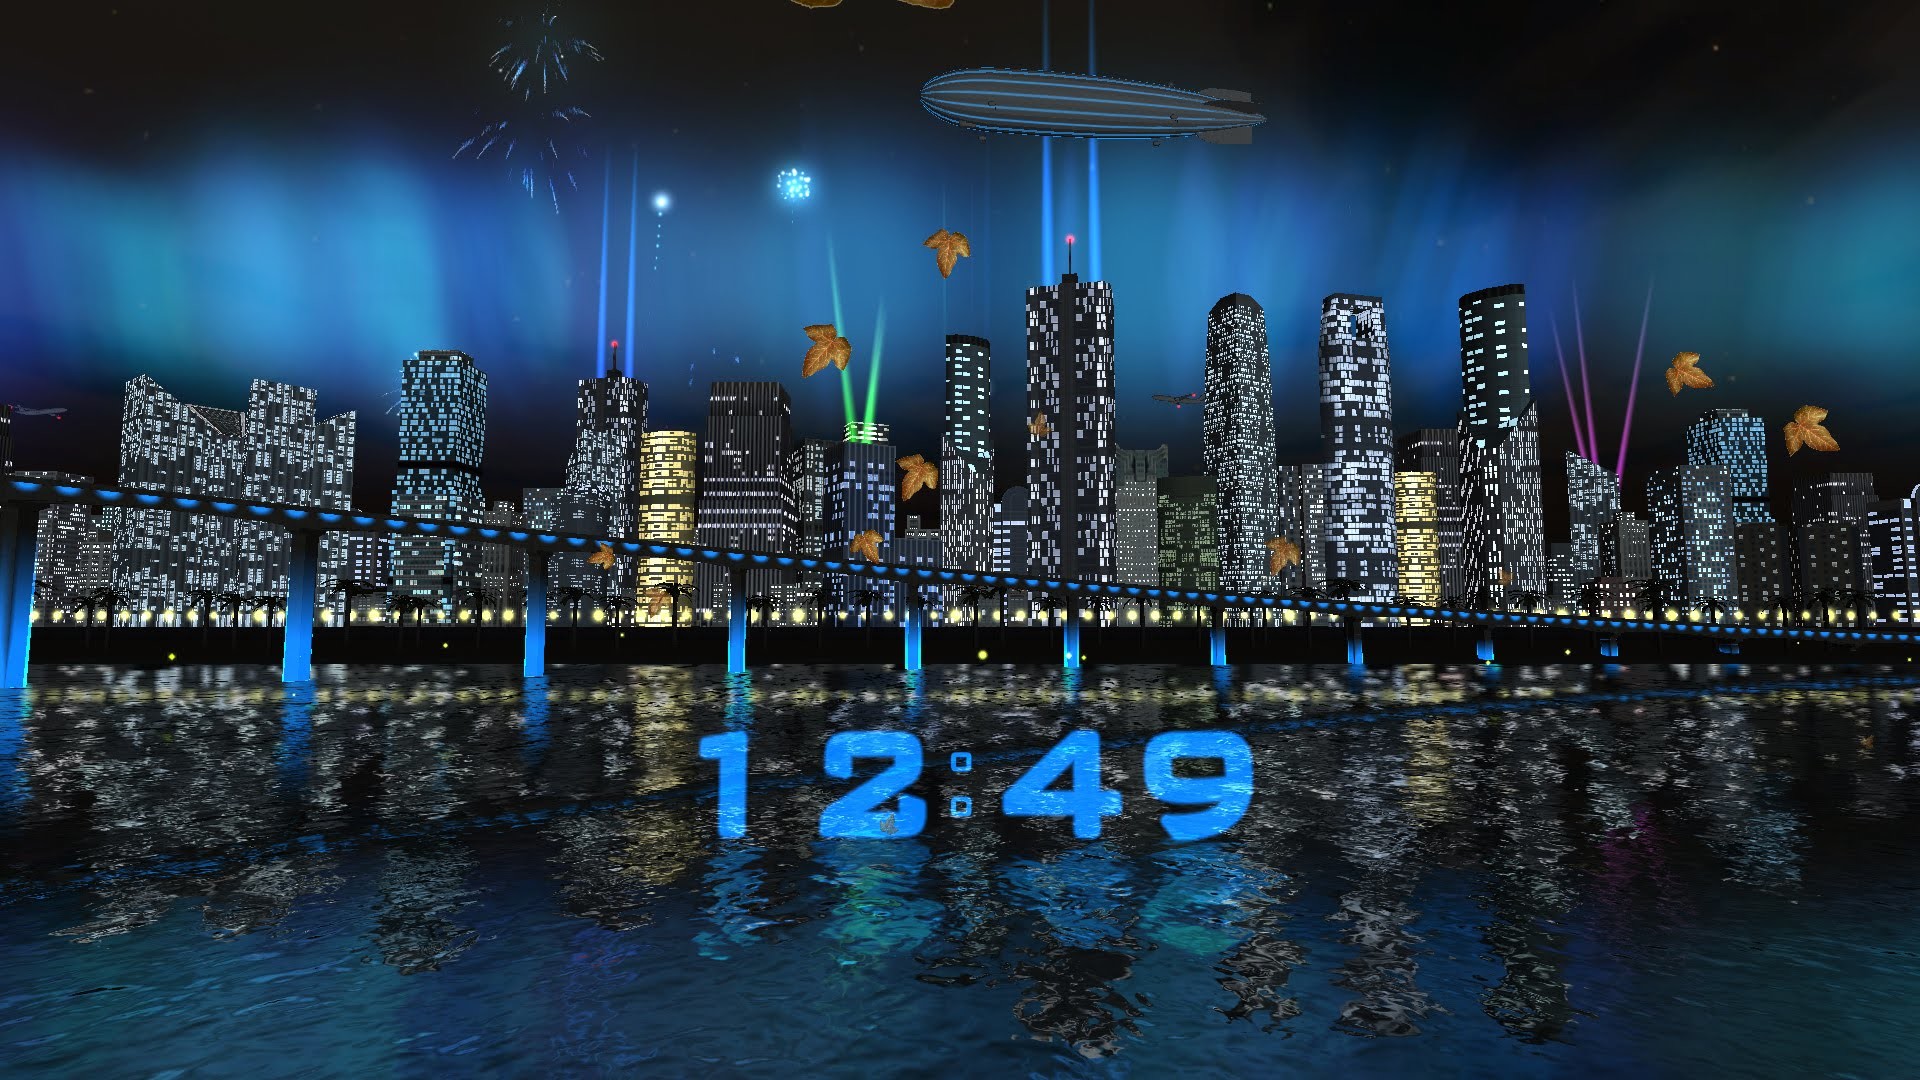 1920x1080 Day Night City Fireworks LWP (v.1.0.3) - Live wallpaper by Exacron Full HD(1080p)  - YouTube